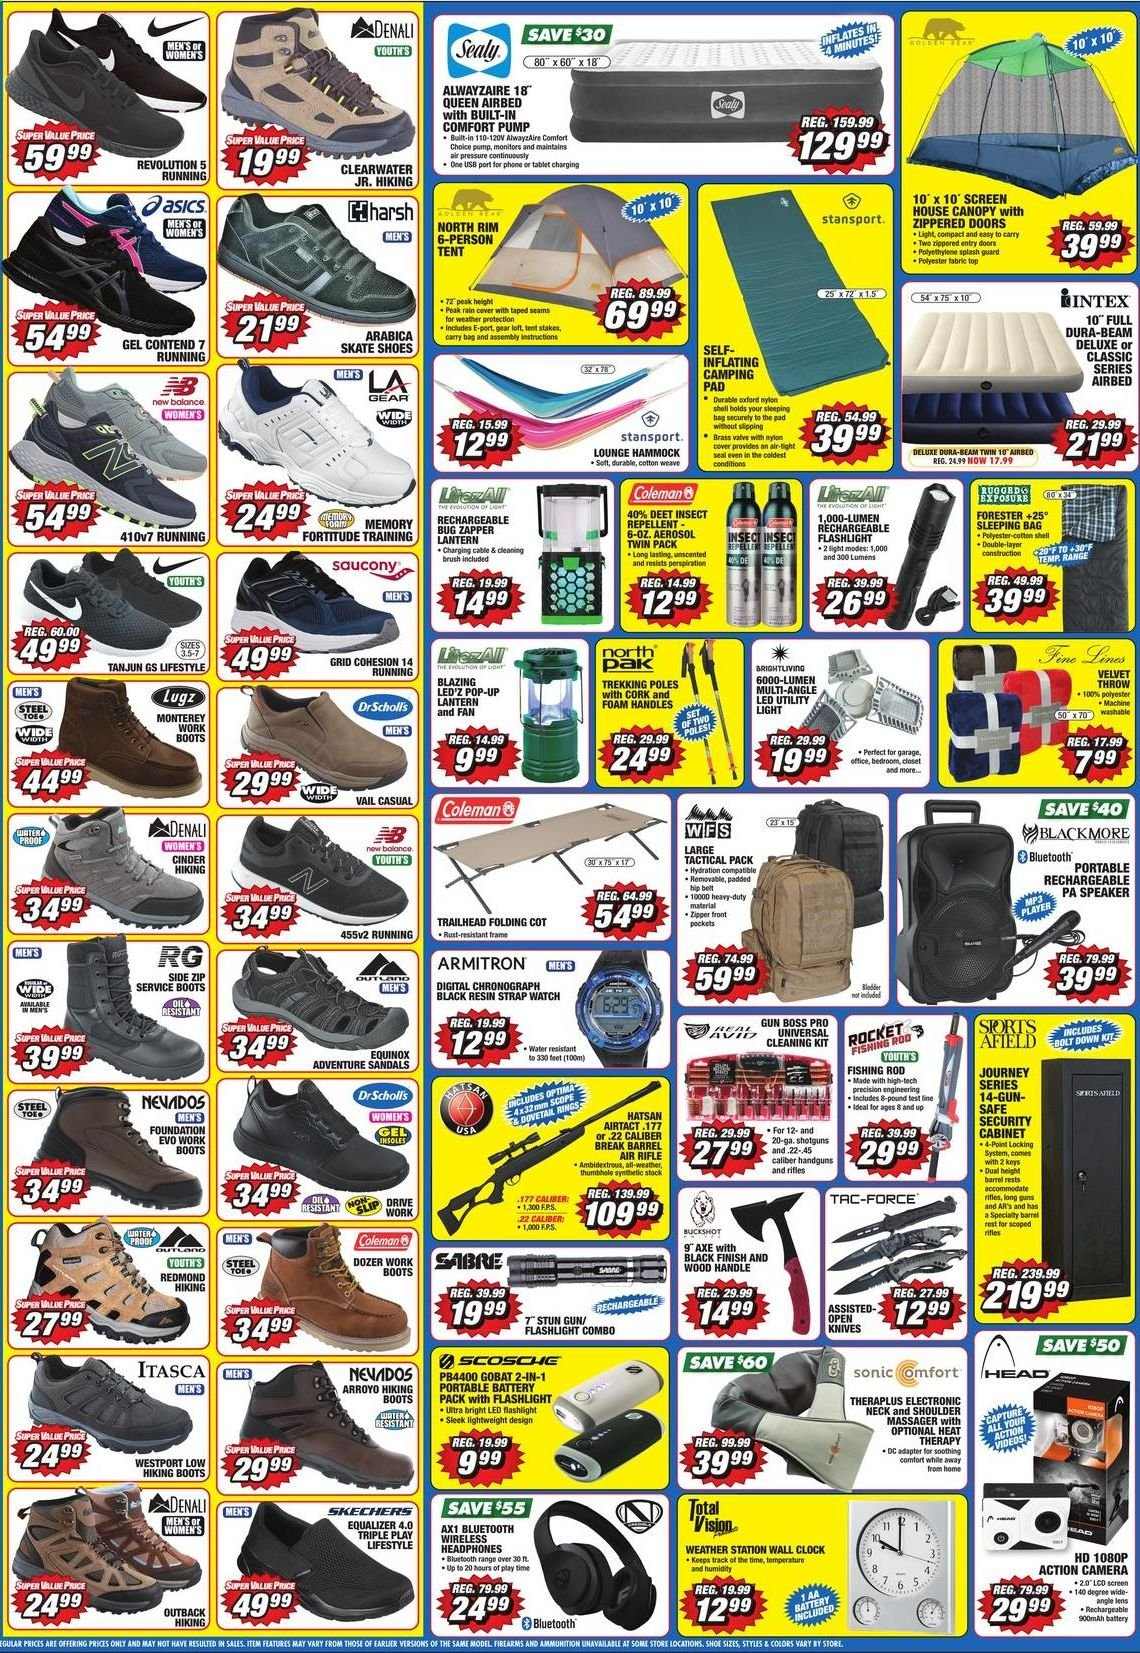 thumbnail - Big 5 Flyer - 07/25/2021 - 07/31/2021 - Sales products - Asics, boots, New Balance, sandals, shoes, Itasca, Dr. Scholl's, Skechers, Saucony, Lugz, Coleman, knife, speaker, wireless headphones, headphones, carry bag, watch, chronograph, flashlight, rifle, security cabinet, sleeping bag, tent, fishing rod, scope. Page 3.